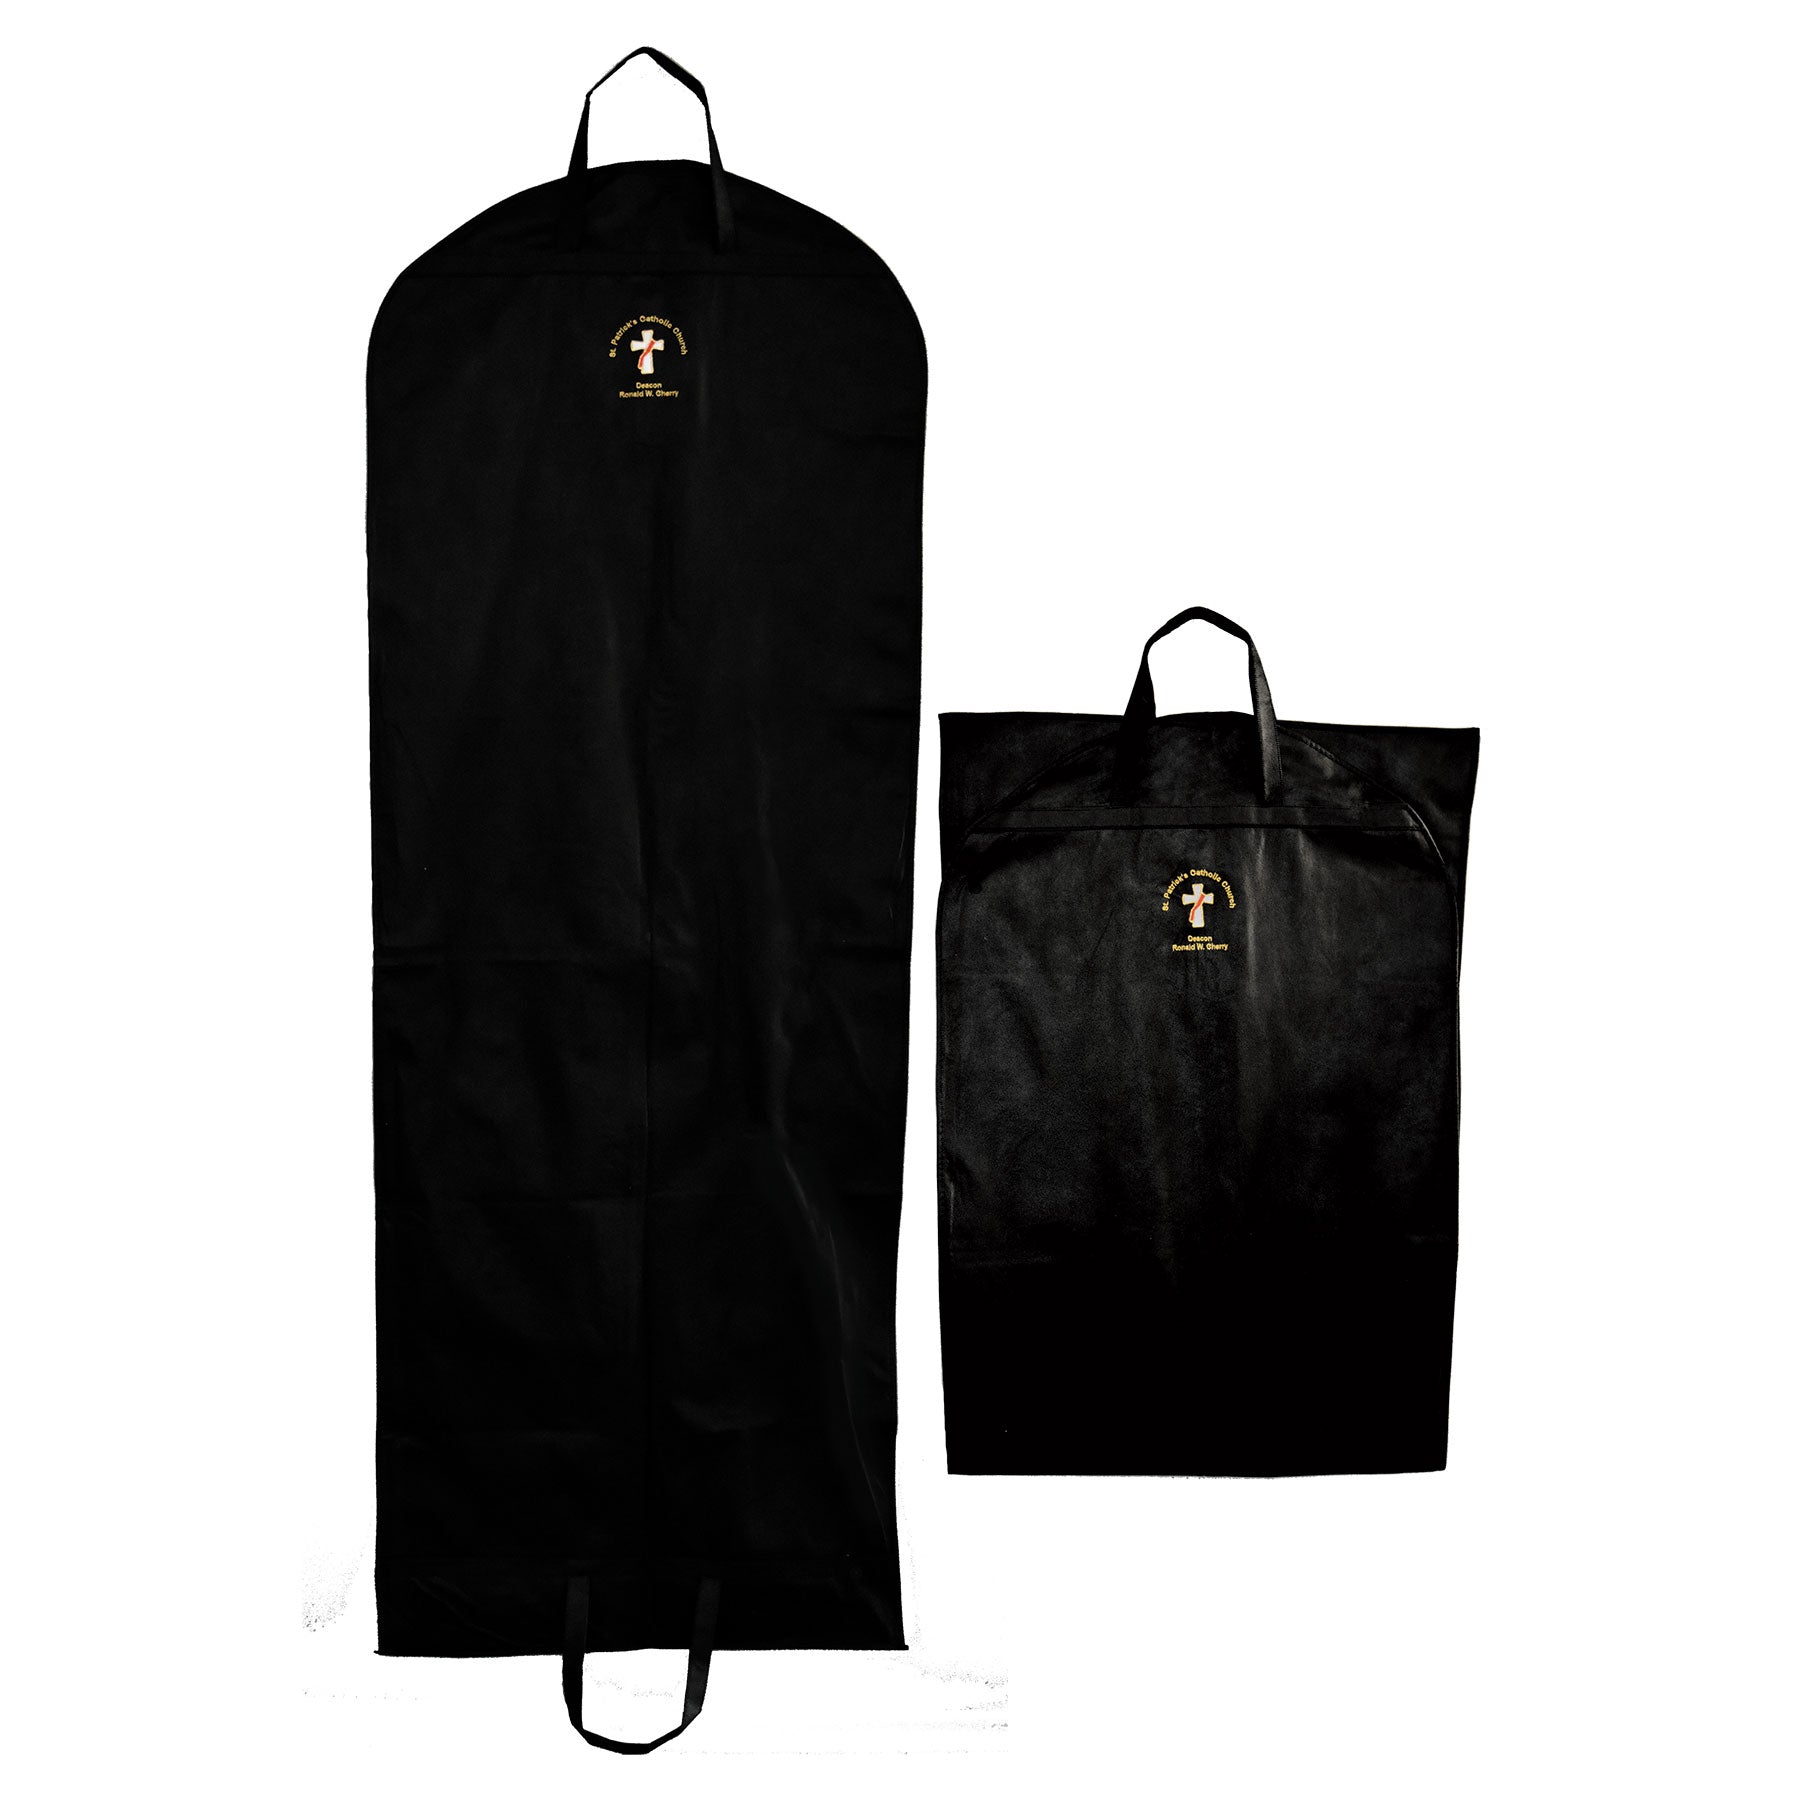 Catholic Deacon Garment Bag with Personalized Monogramming